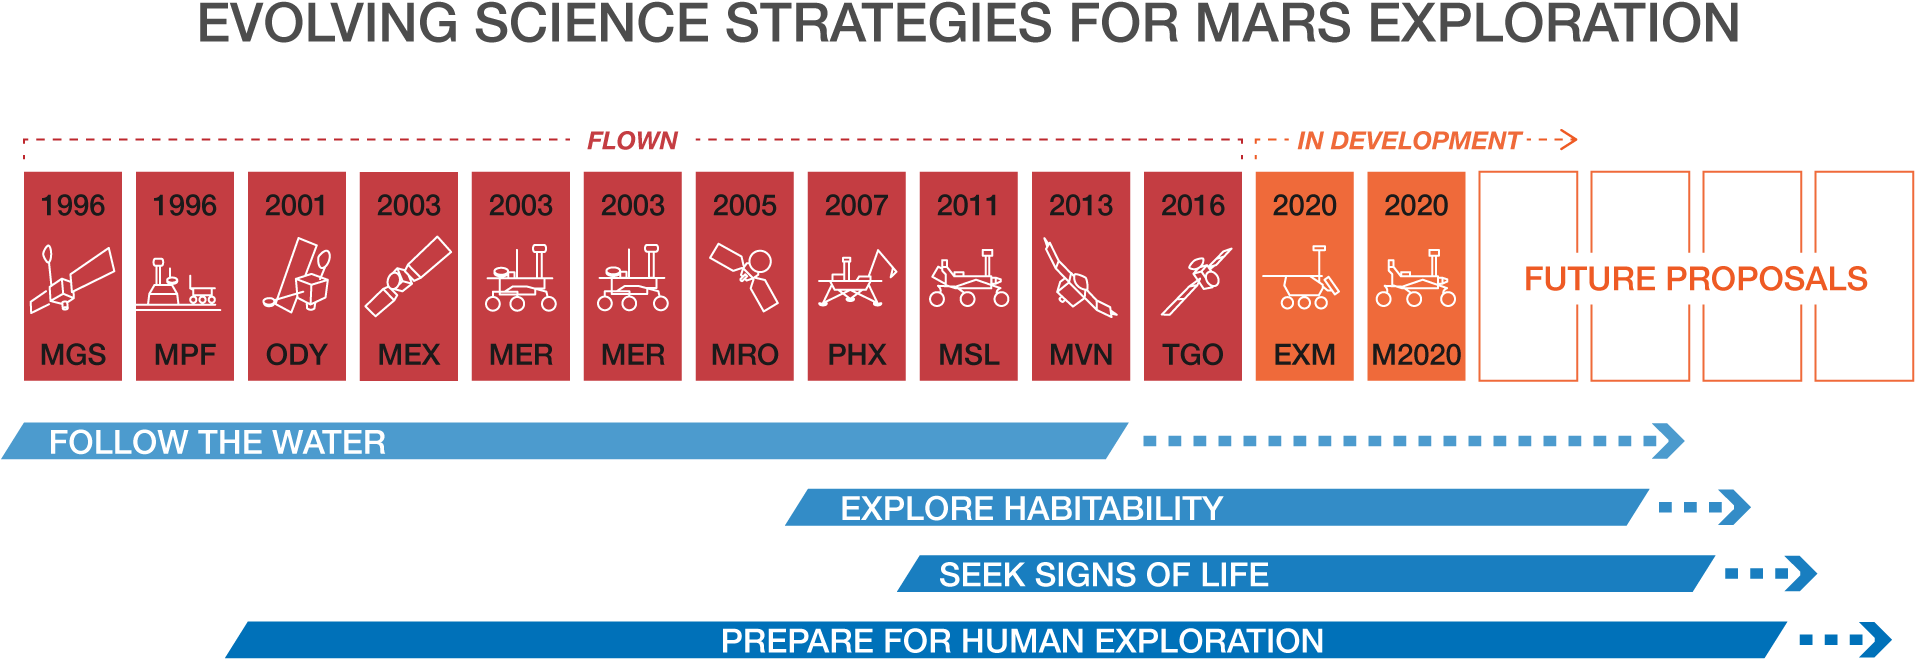 Mars Exploration Timelineand Strategies PNG